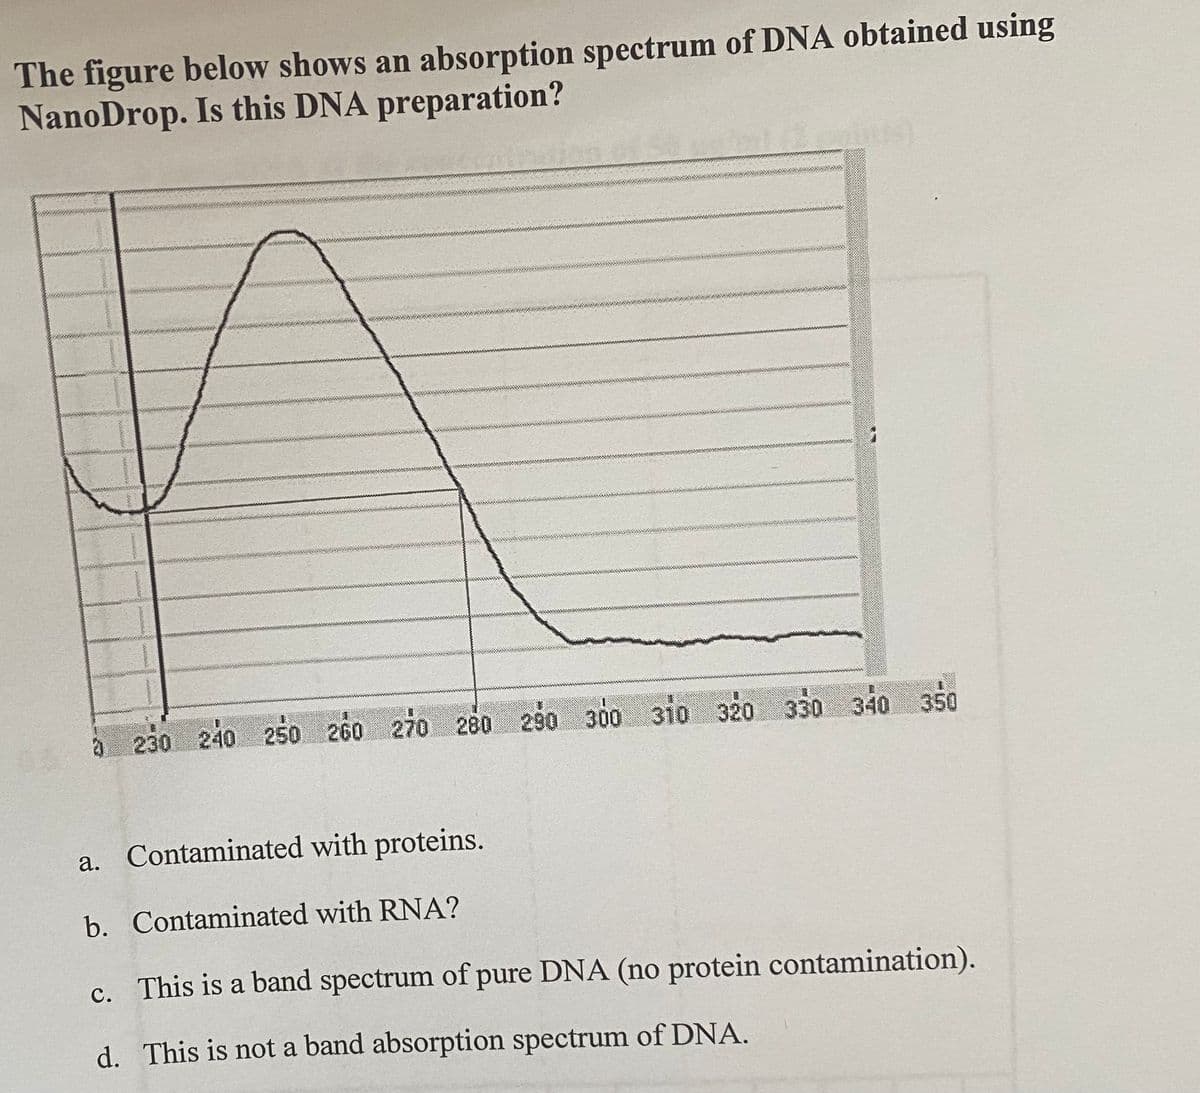 The figure below shows an absorption spectrum of DNA obtained using
NanoDrop. Is this DNA preparation?
à 230 240 250 260 270 280 290 300 310 320 330 340 350
a. Contaminated with proteins.
b. Contaminated with RNA?
c. This is a band spectrum of pure DNA (no protein contamination).
d.
This is not a band absorption spectrum of DNA.